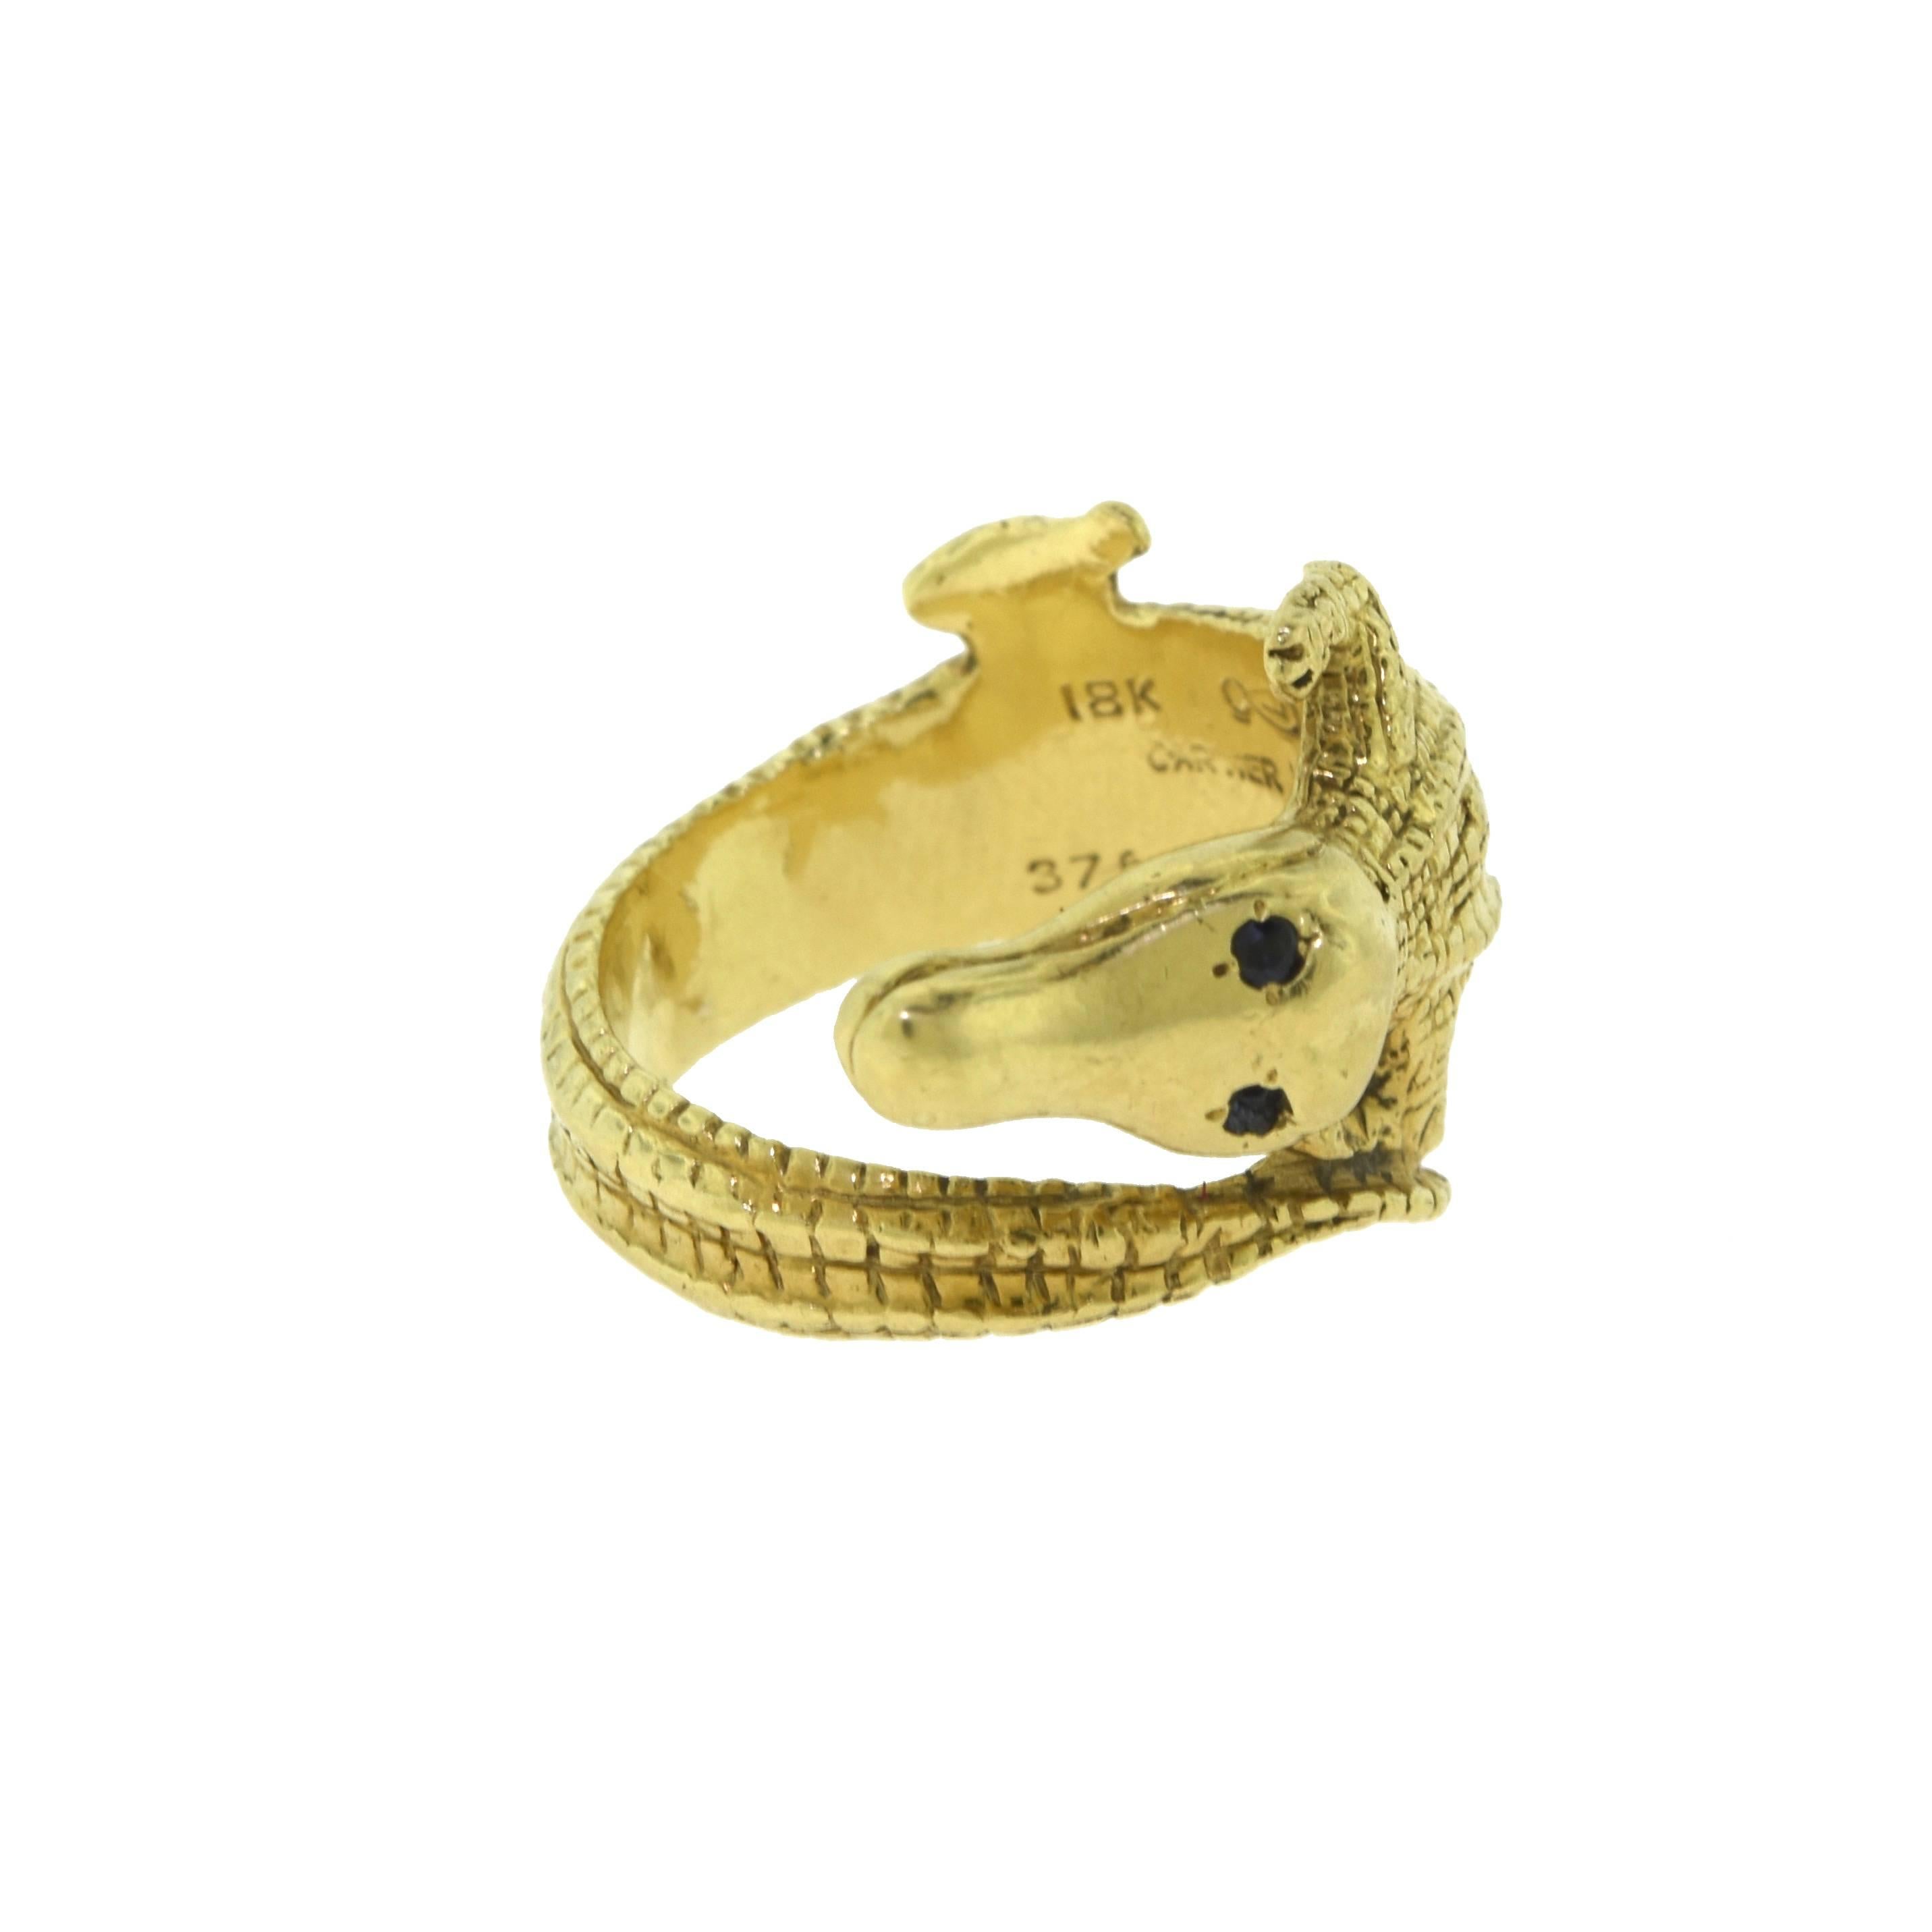 Designer: Cartier
Metal: Yellow Gold
Metal Purity: 18k
Stones: 2 Small Sapphire Eyes 
Total Item Weight (g): 12.4
Ring Size: 5
Ring Width: 14.91 mm tapers to 4.87 mm
Signature: Cartier